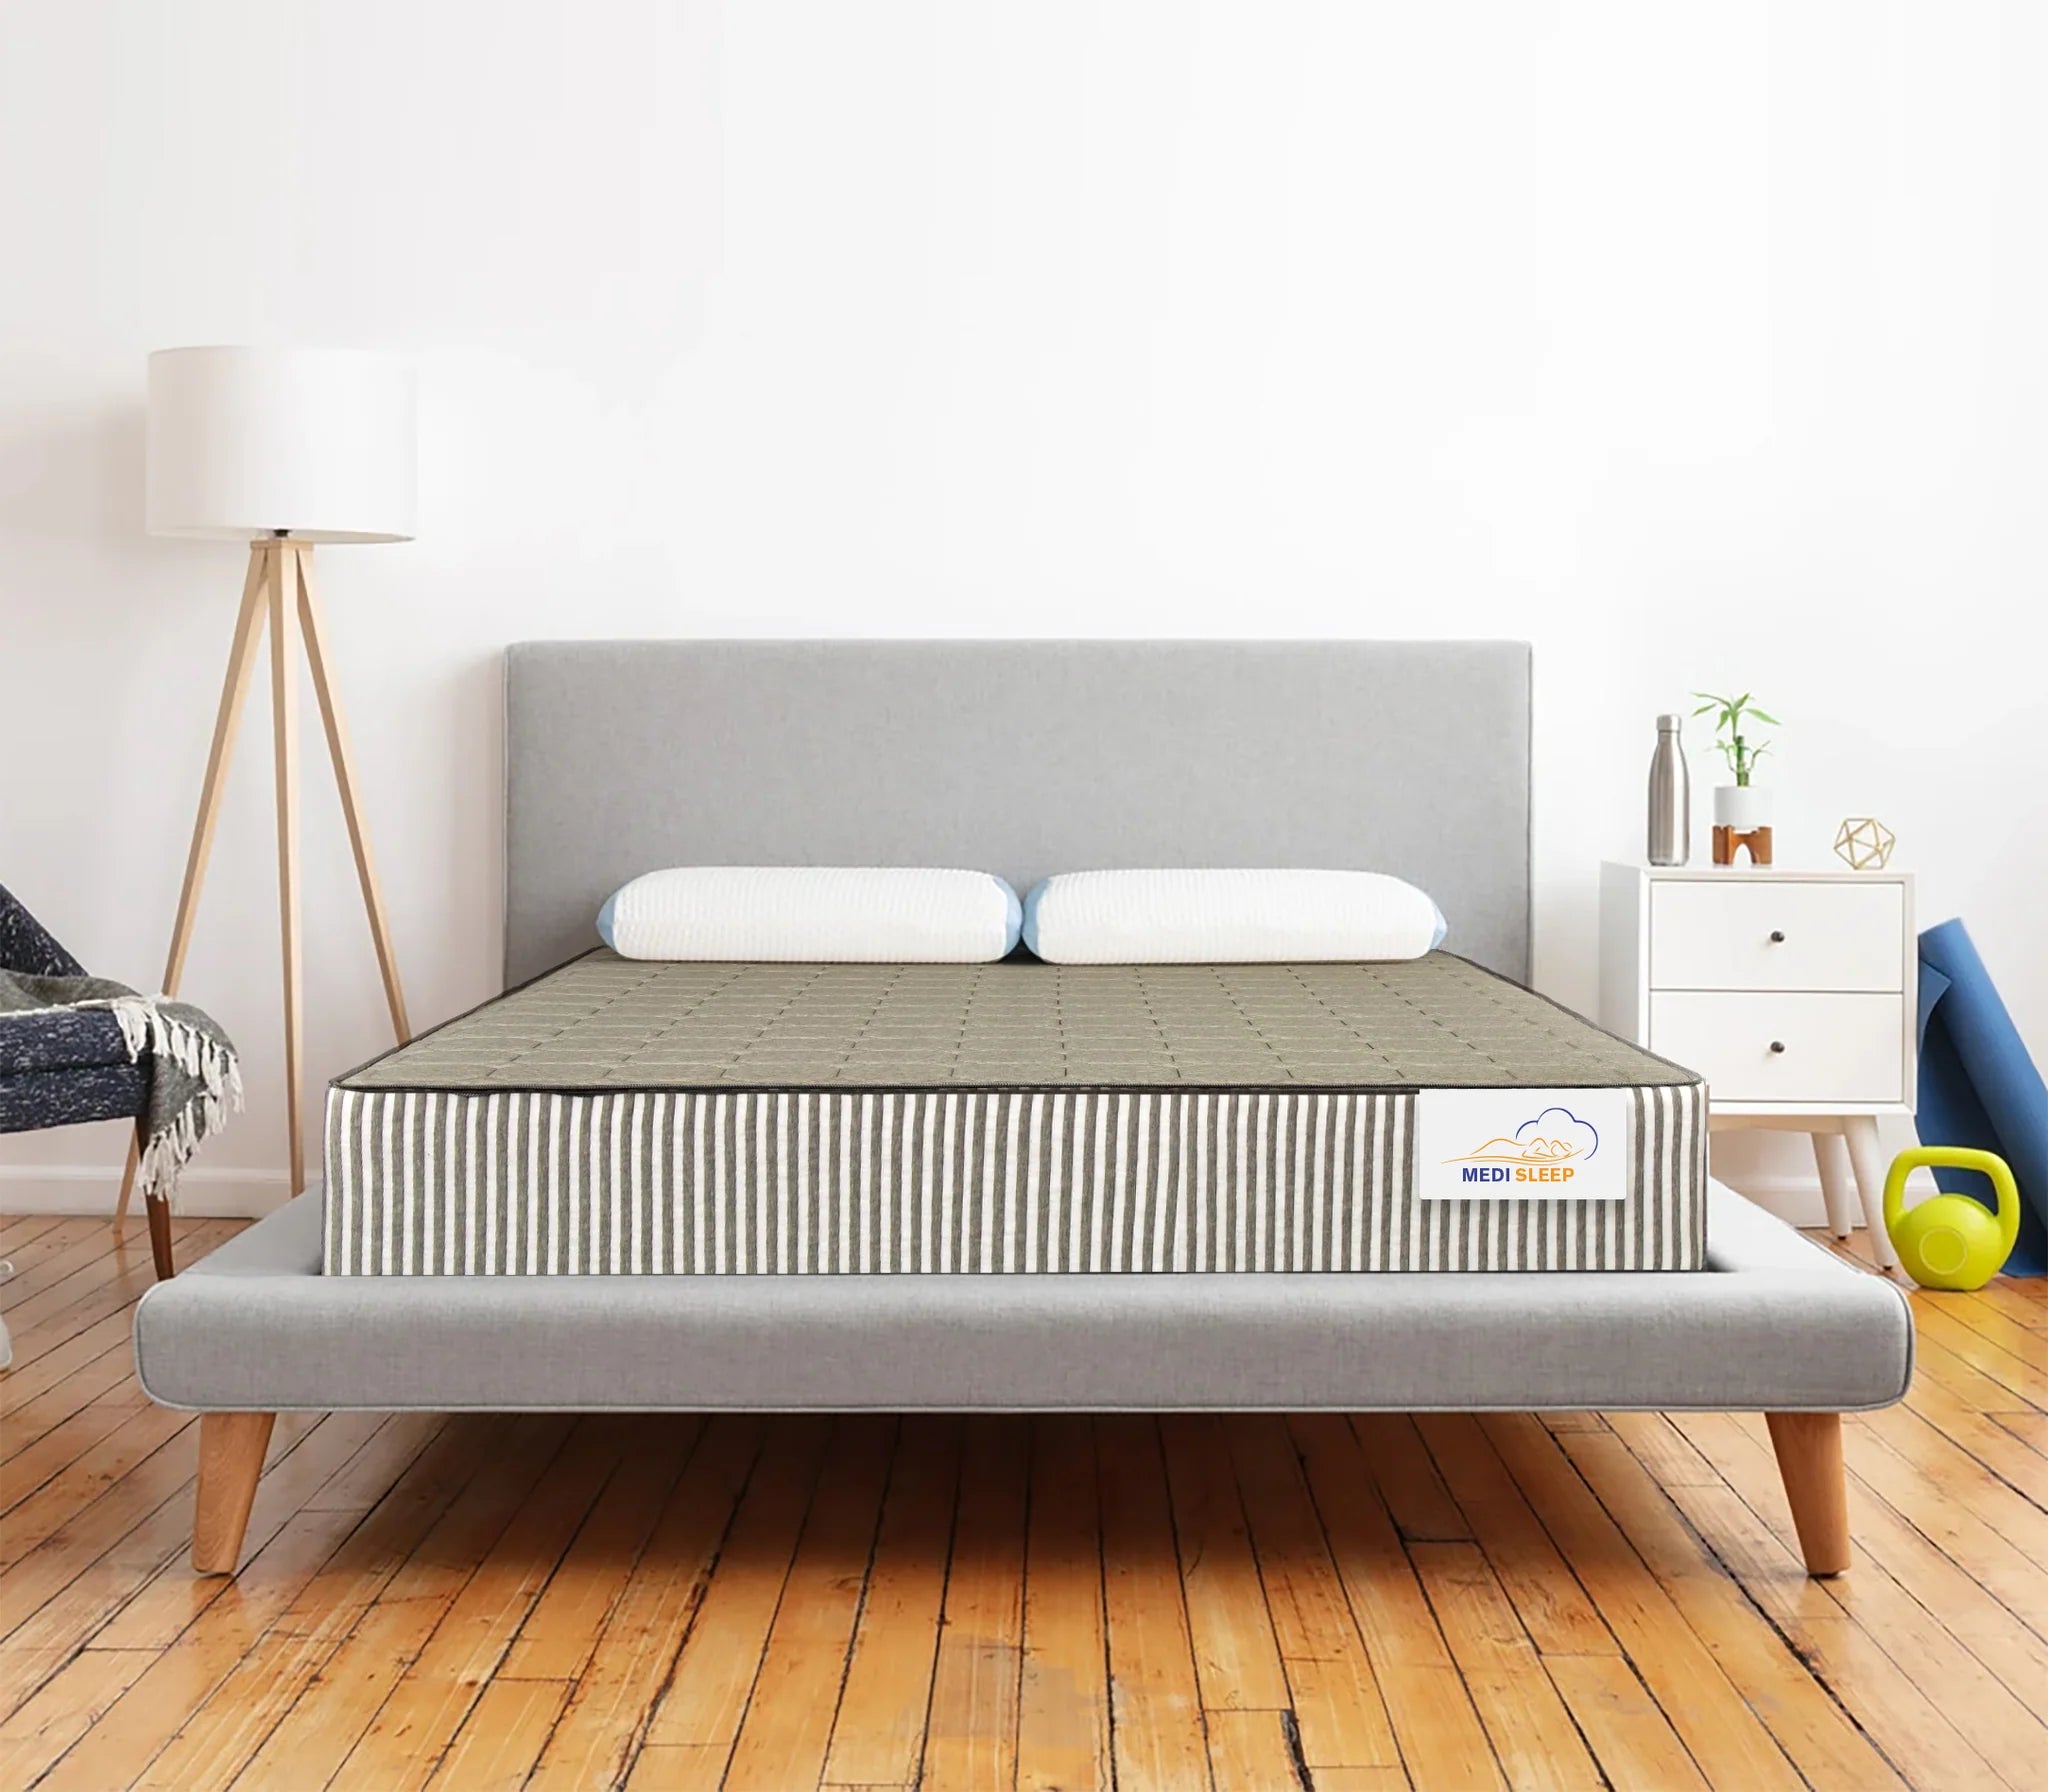 Which material mattress is best for health?